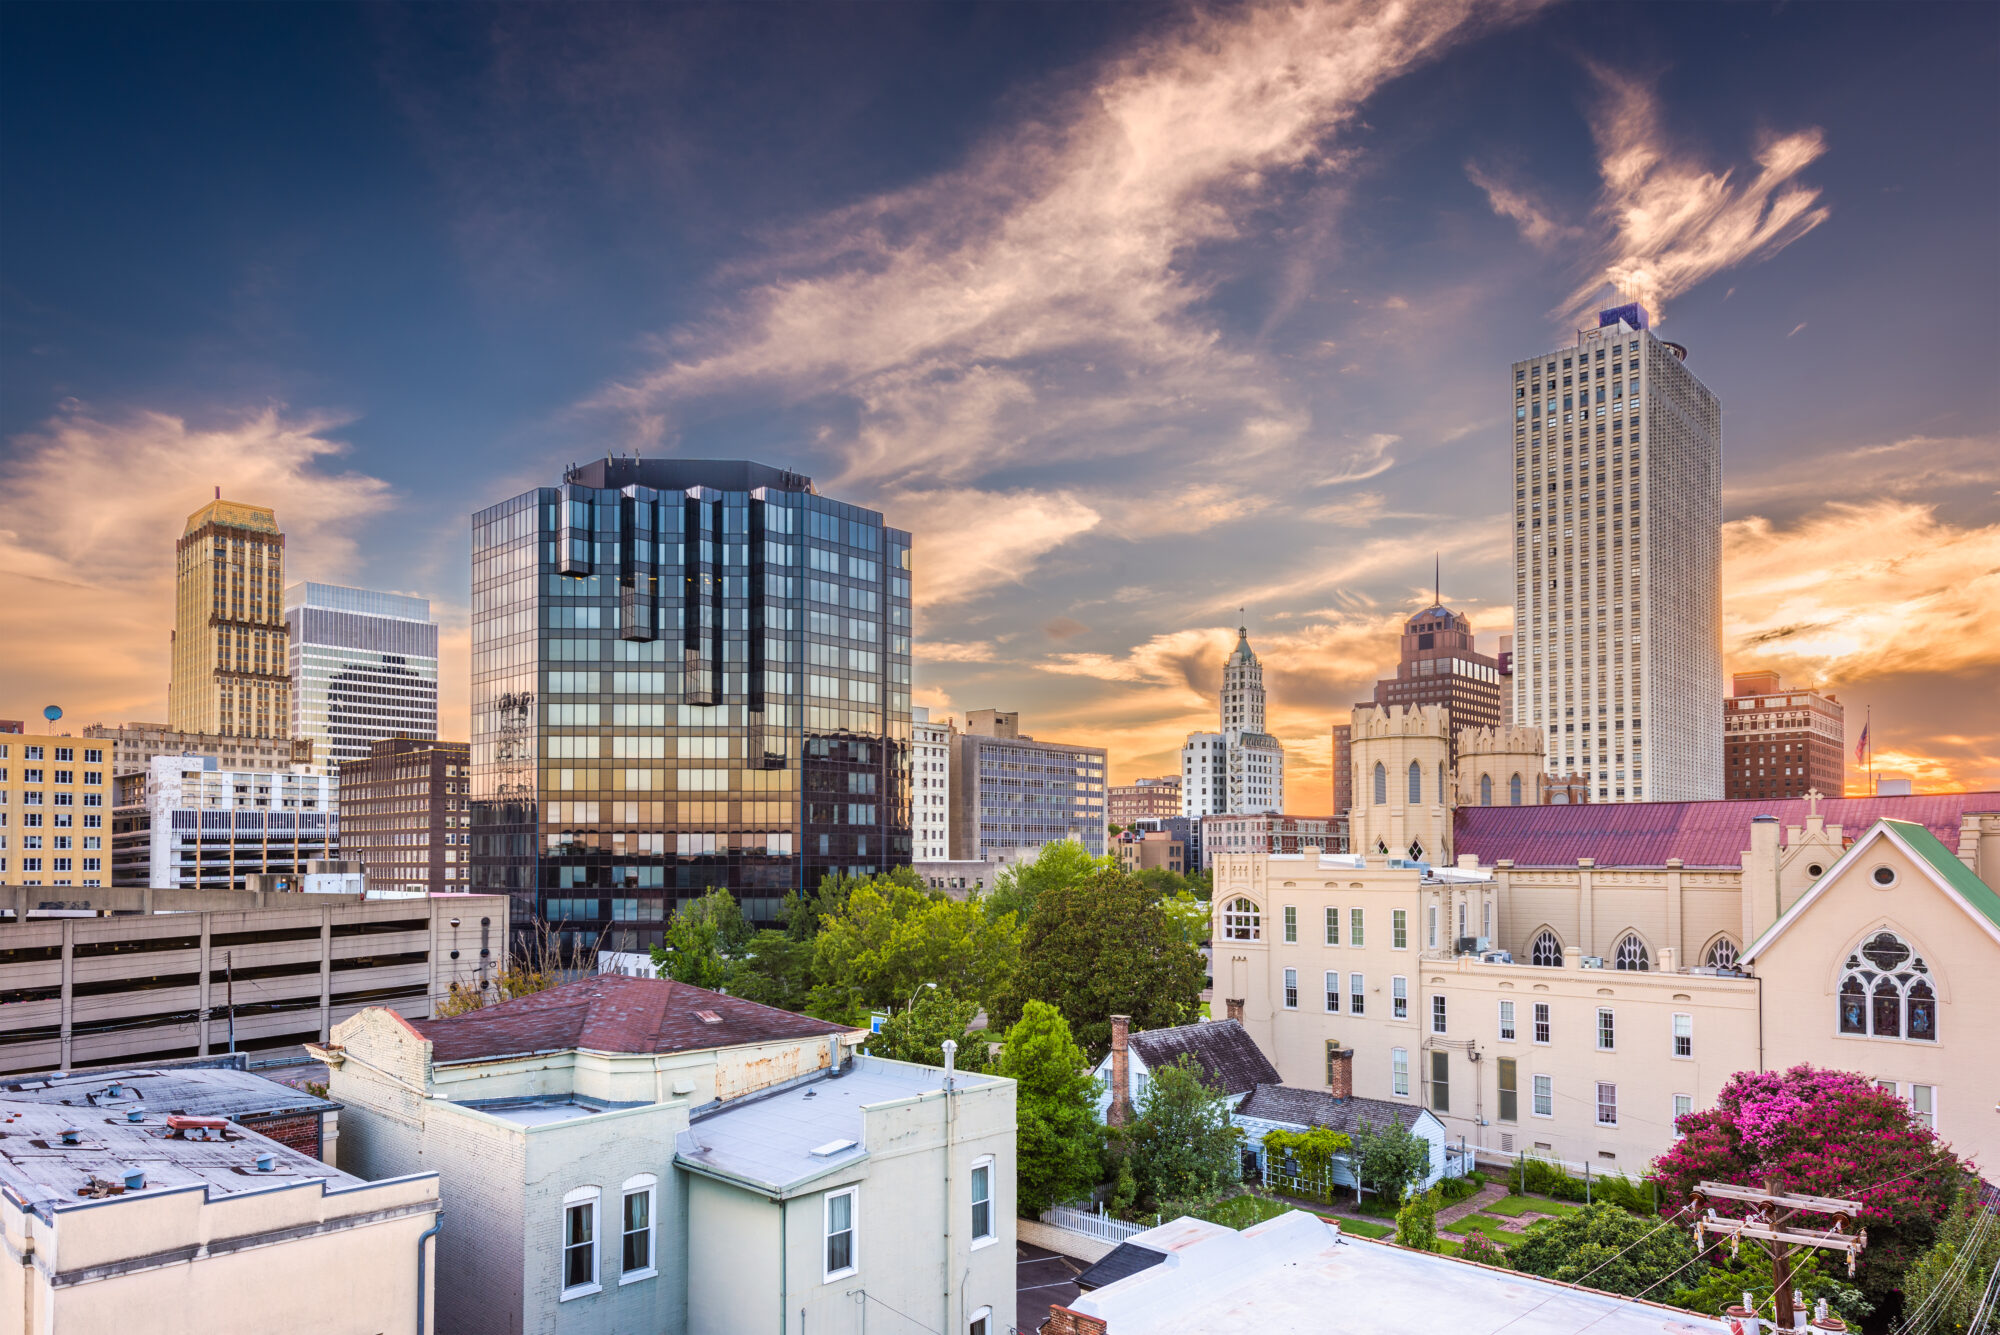 Why Invest In Memphis?